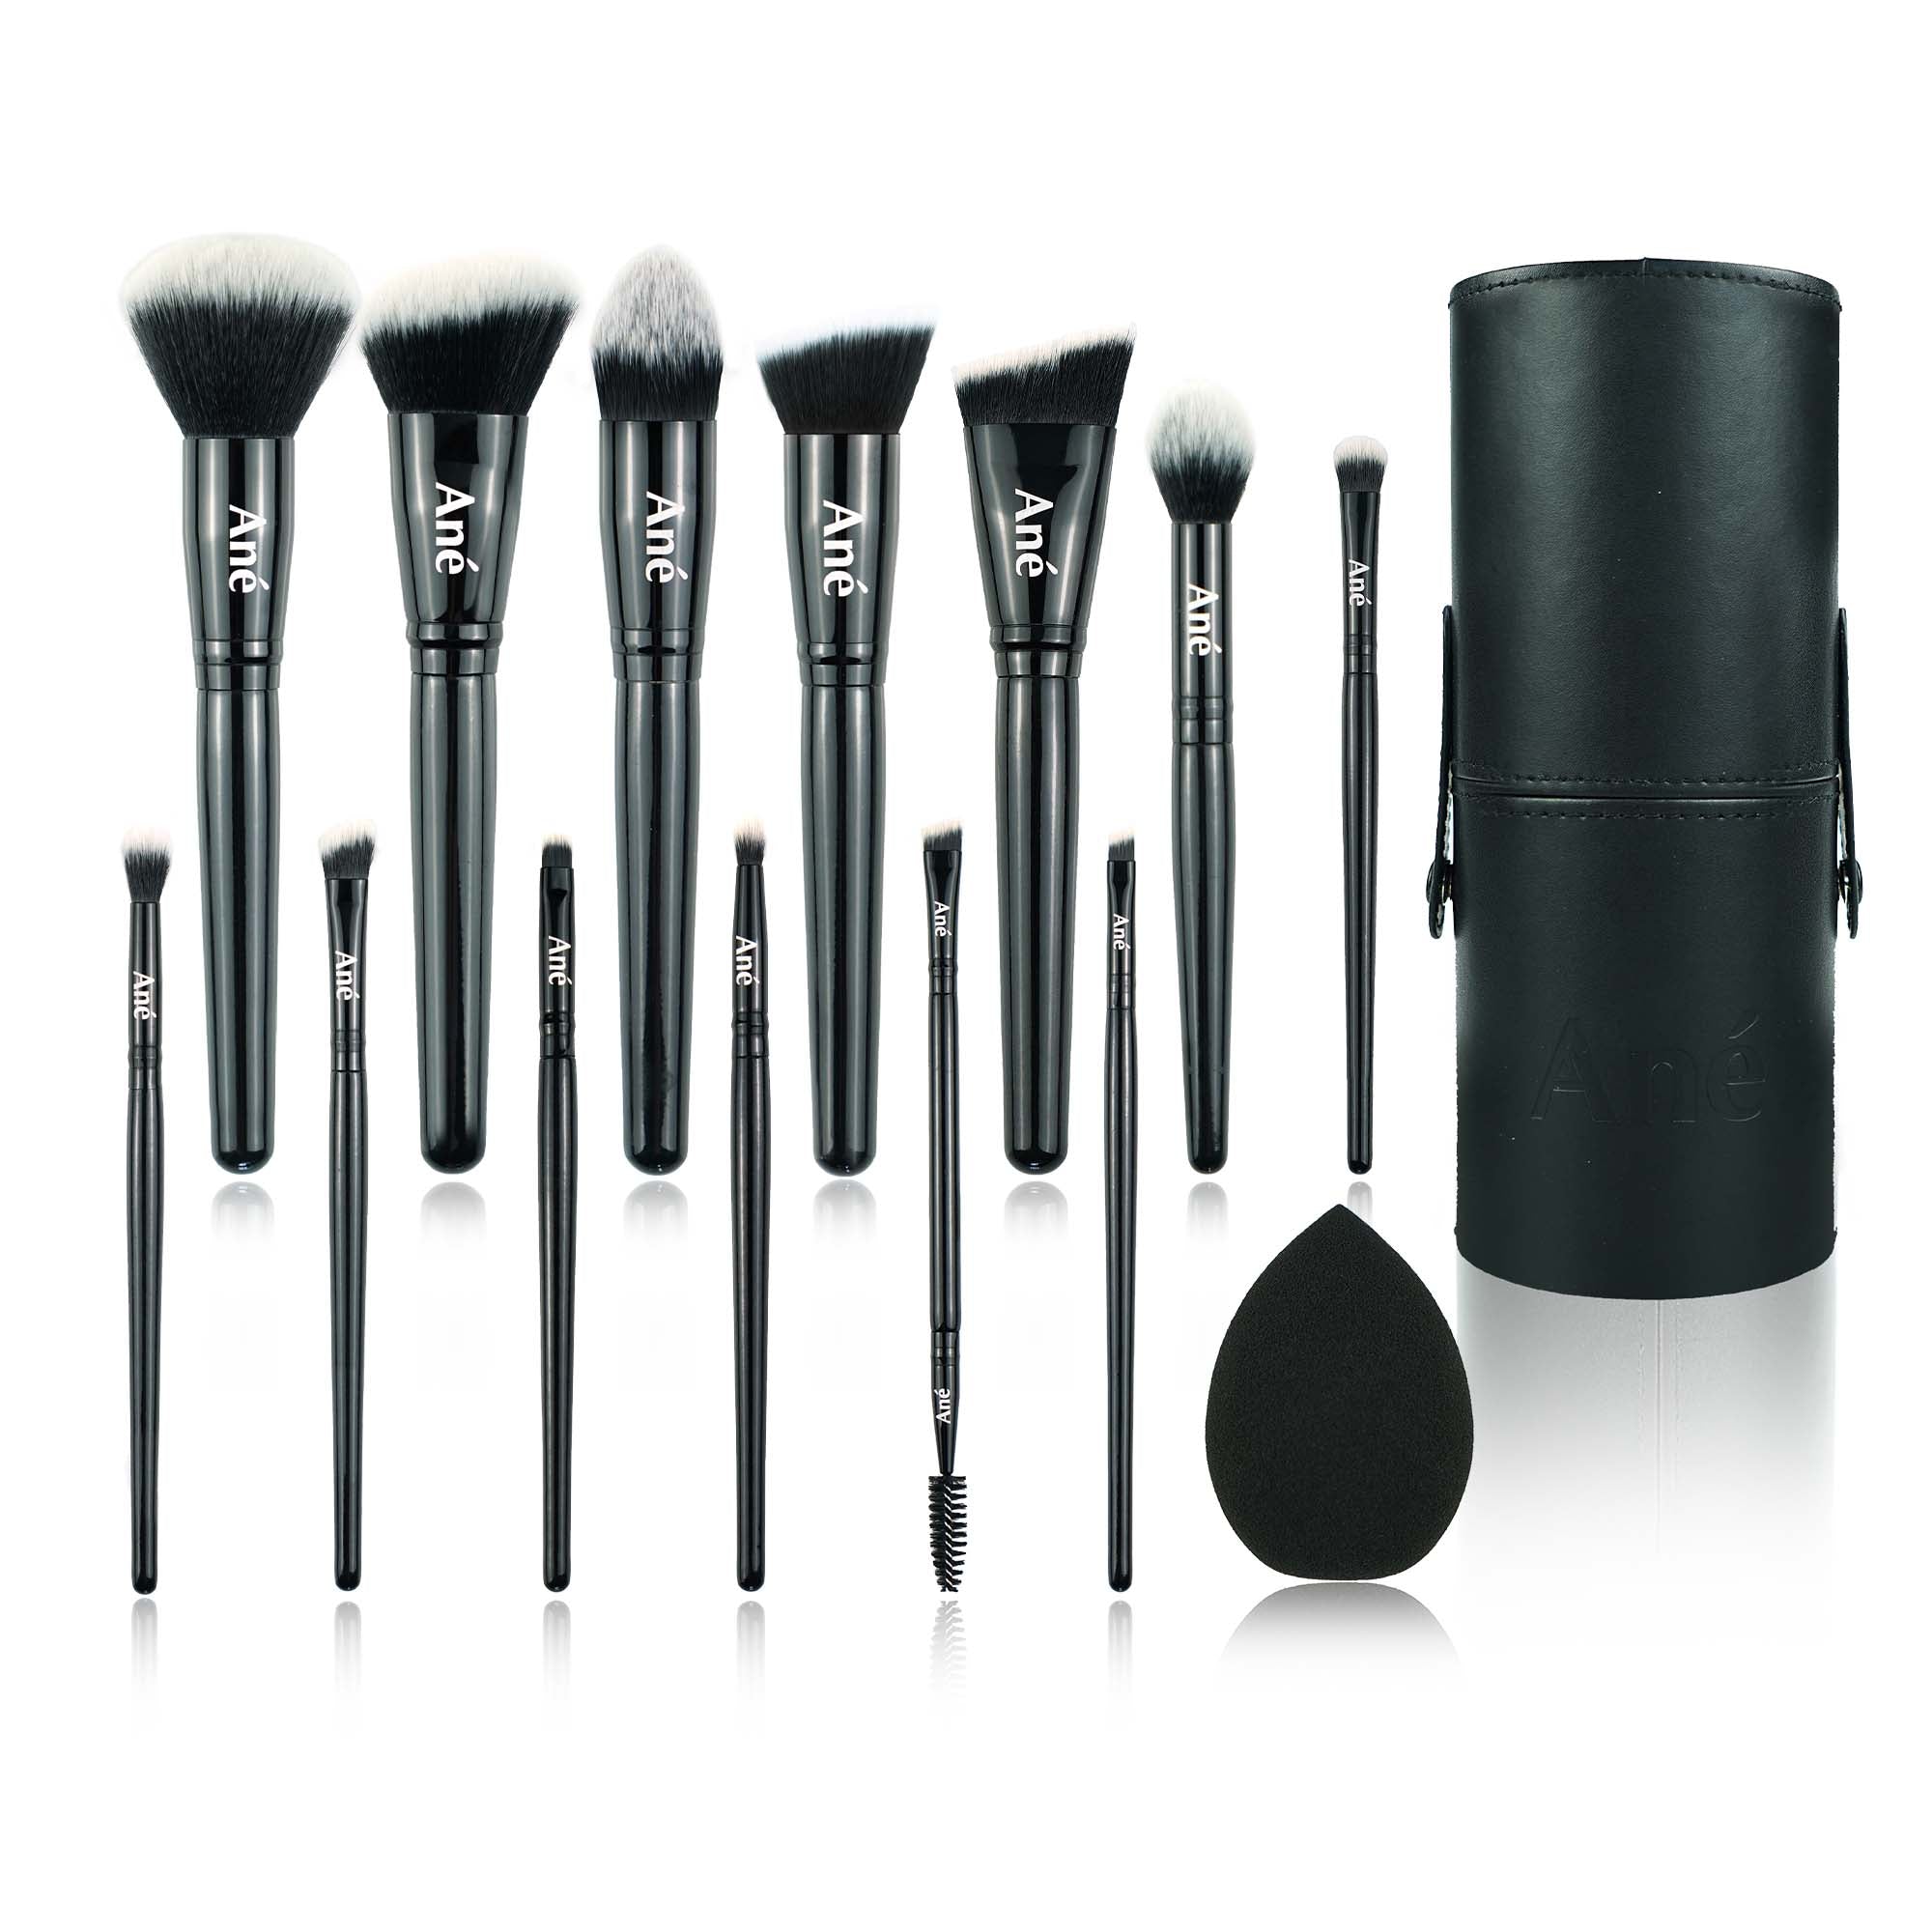 list of makeup brushes and their uses